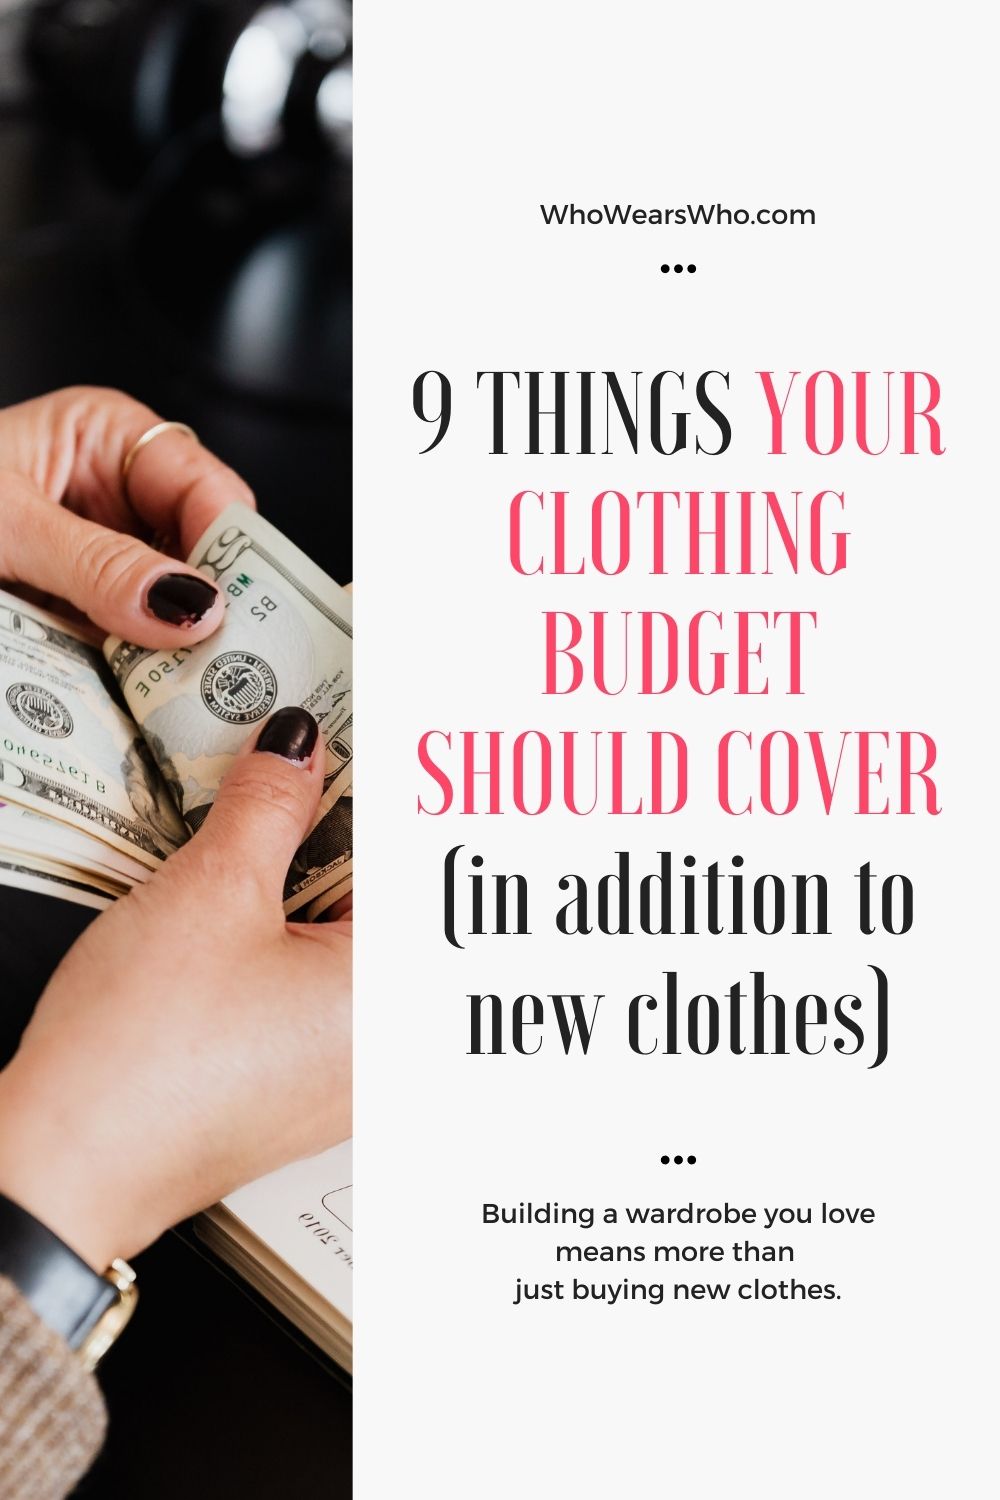 9 Things Your Clothing Budget Should Cover